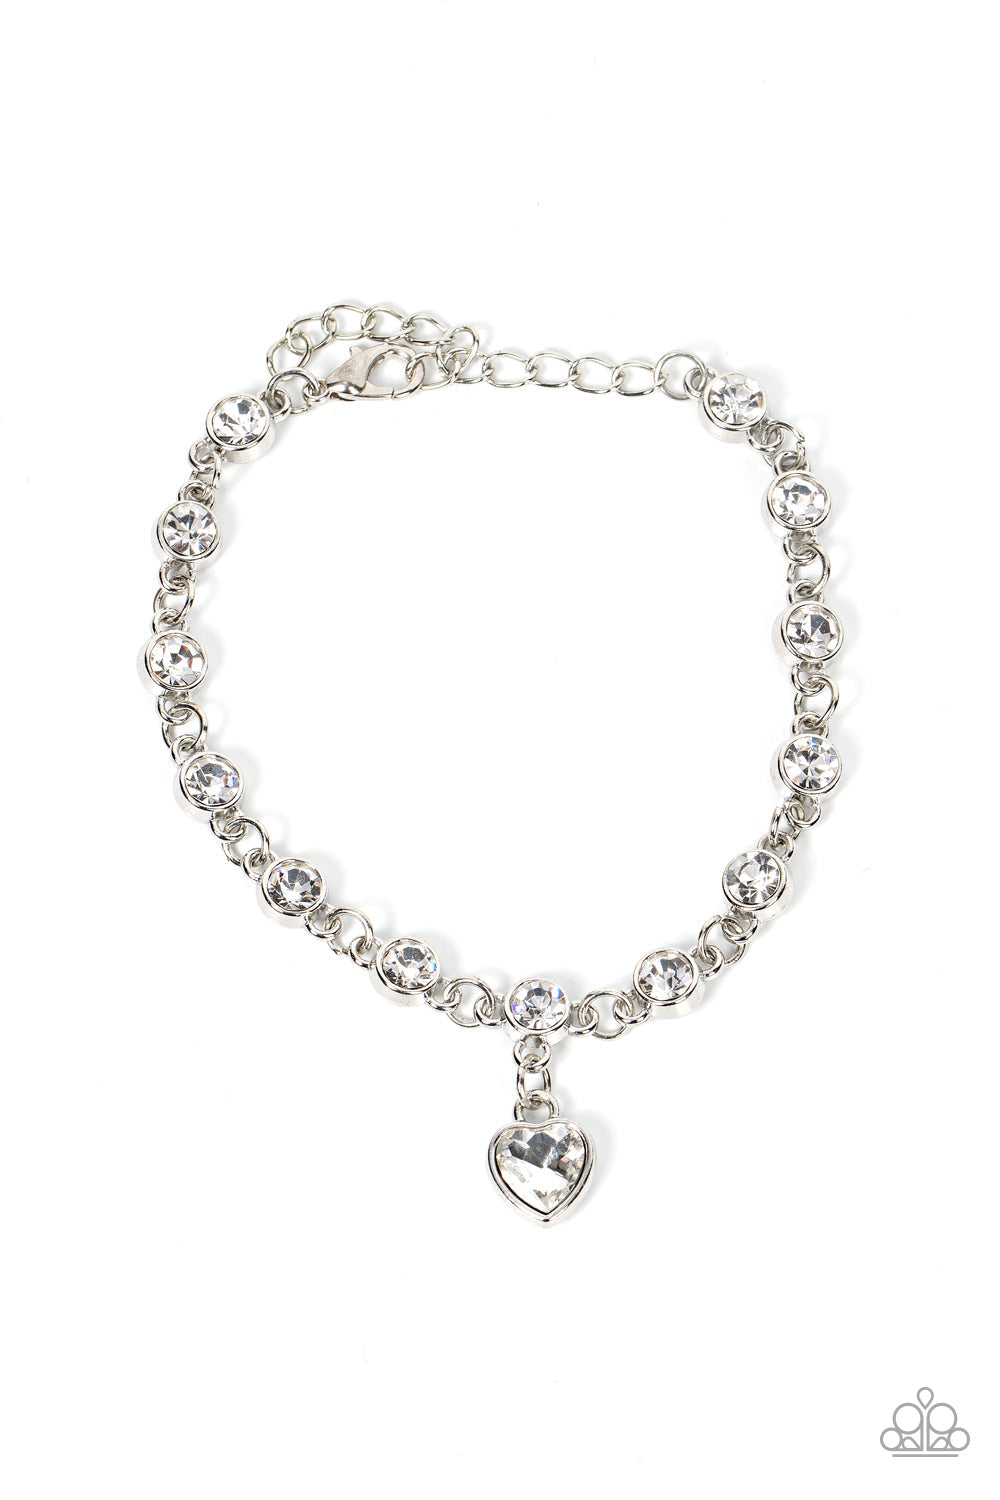 Truly Lovely - White Heart - Silver Bracelet - Paparazzi Accessories - White rhinestone heart charm dances from a strand of white rhinestones, resulting in a flirtatious sparkle around the wrist. Features an adjustable clasp closure.